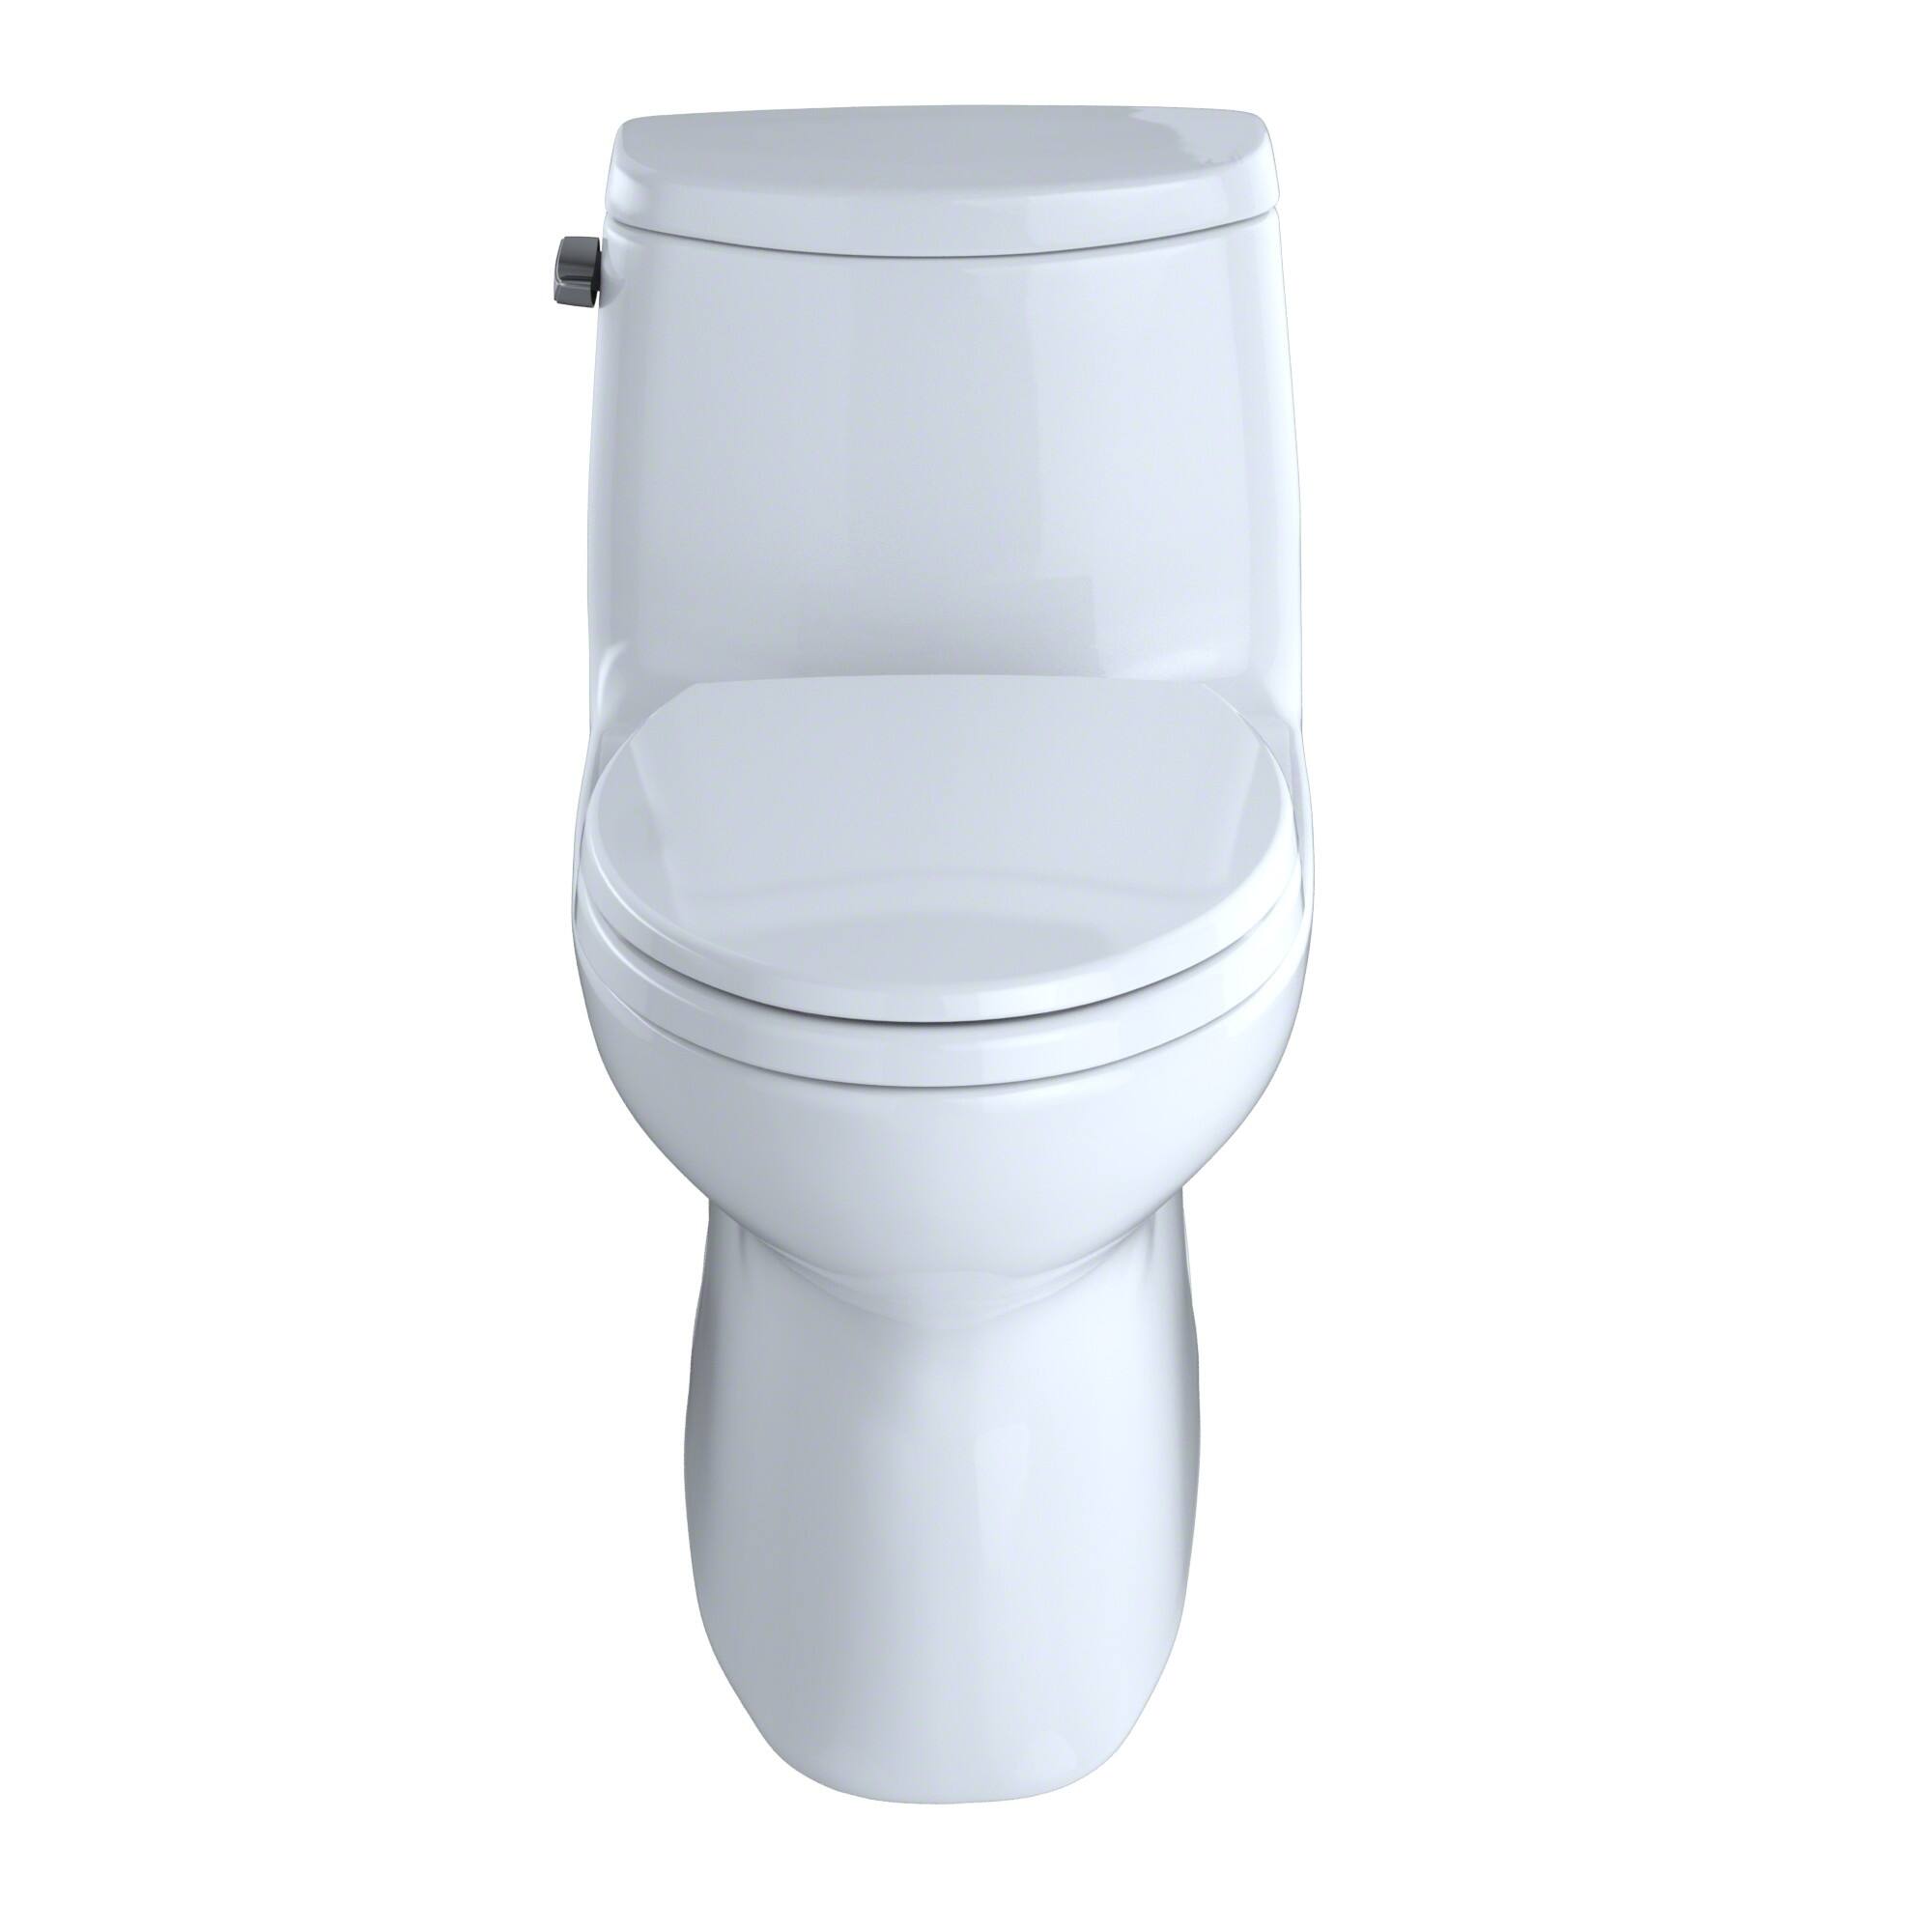 Toto Carlyle II 1-Piece Elongated 1.28 GPF Toilet Review